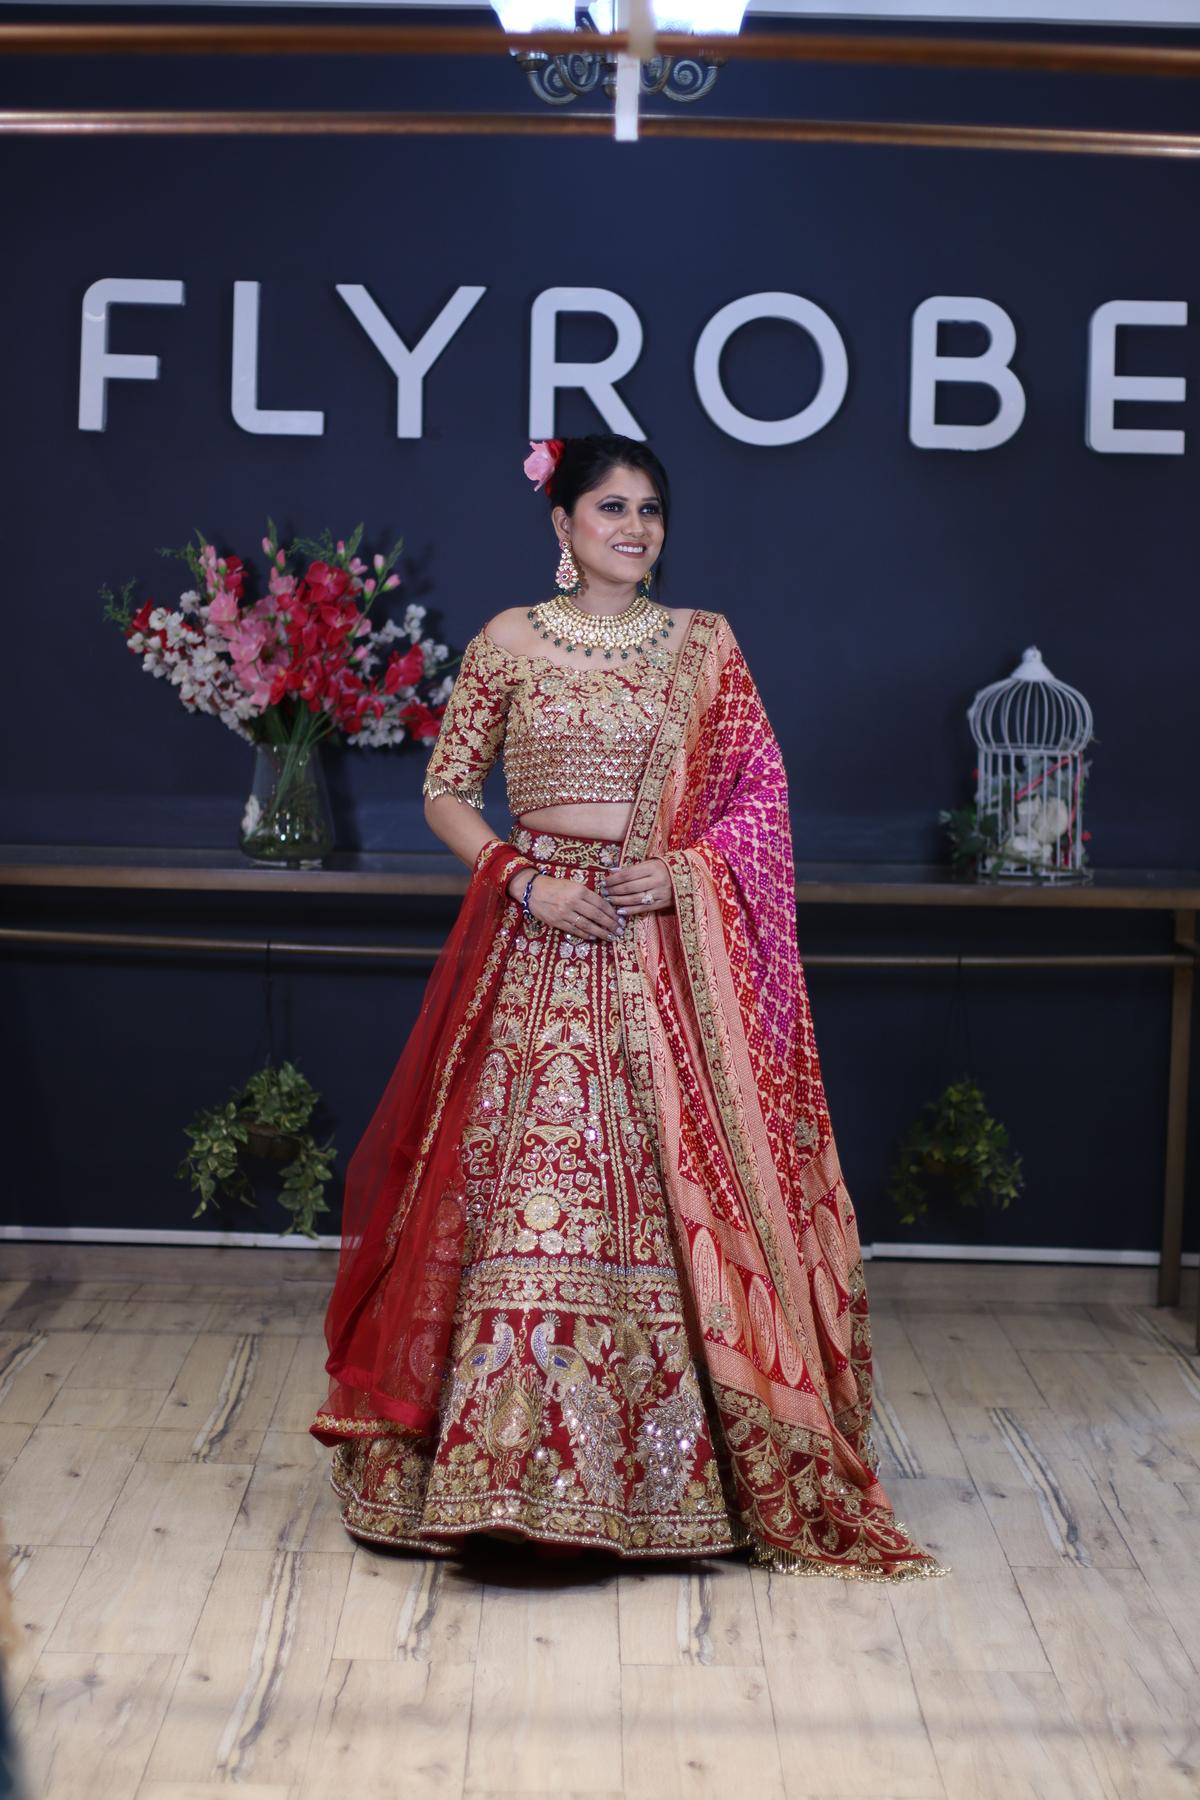 Photo of bride wearing a regal red and gold lehenga